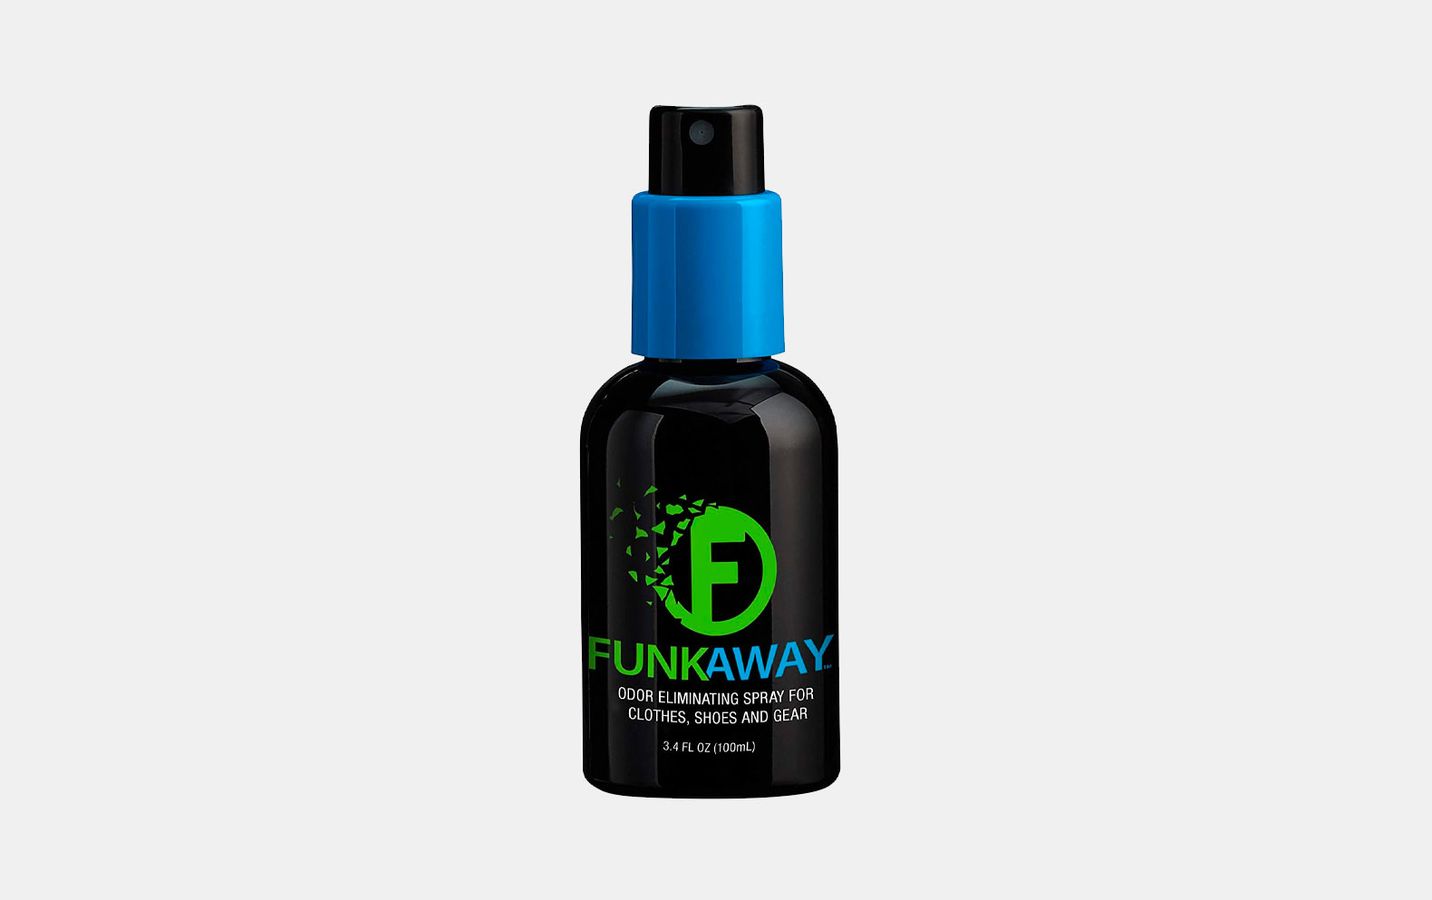 FunkAway Odor Eliminator Spray product image of a black spray bottle with green and blue branding.